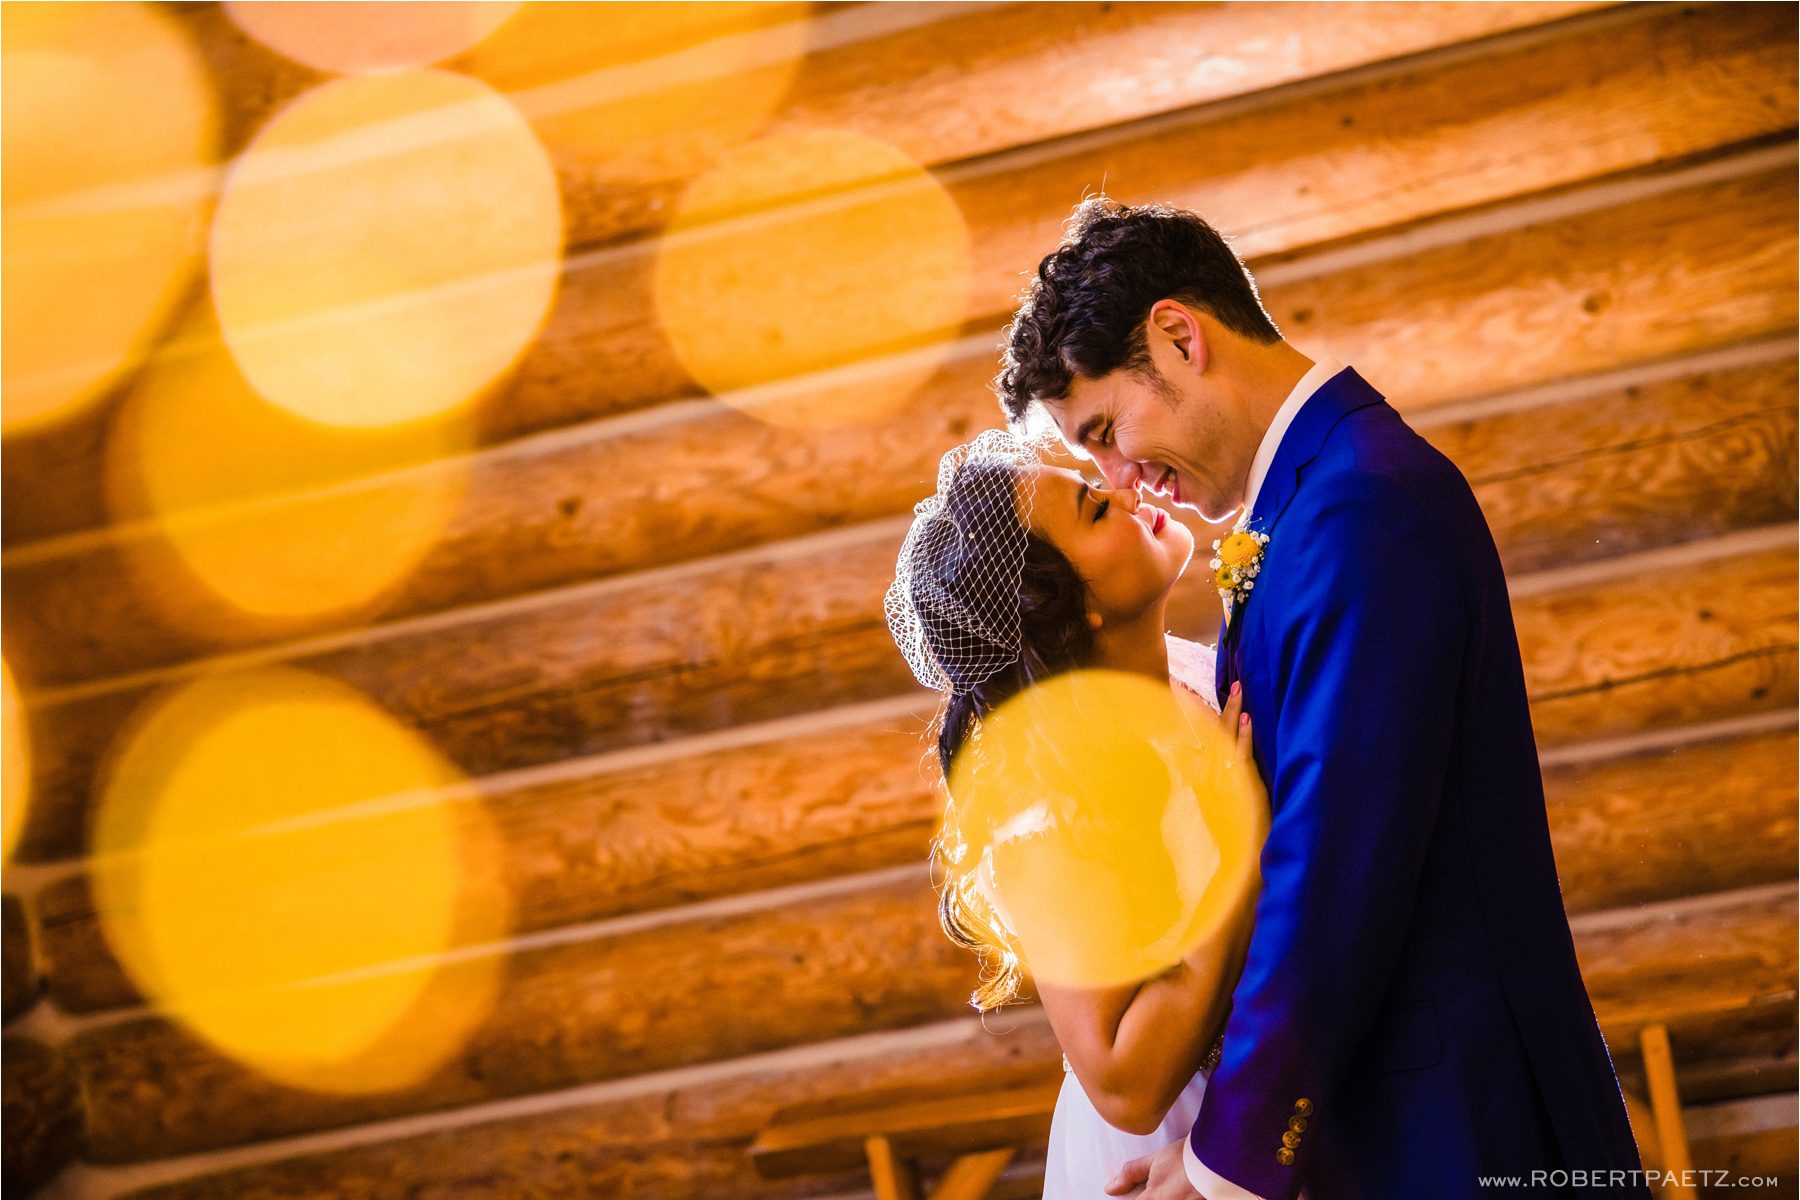 A fall micro wedding at the Wallace Falls Lodge in Washington (near Seattle), photographed by the destination wedding photographer, Robert Paetz. 